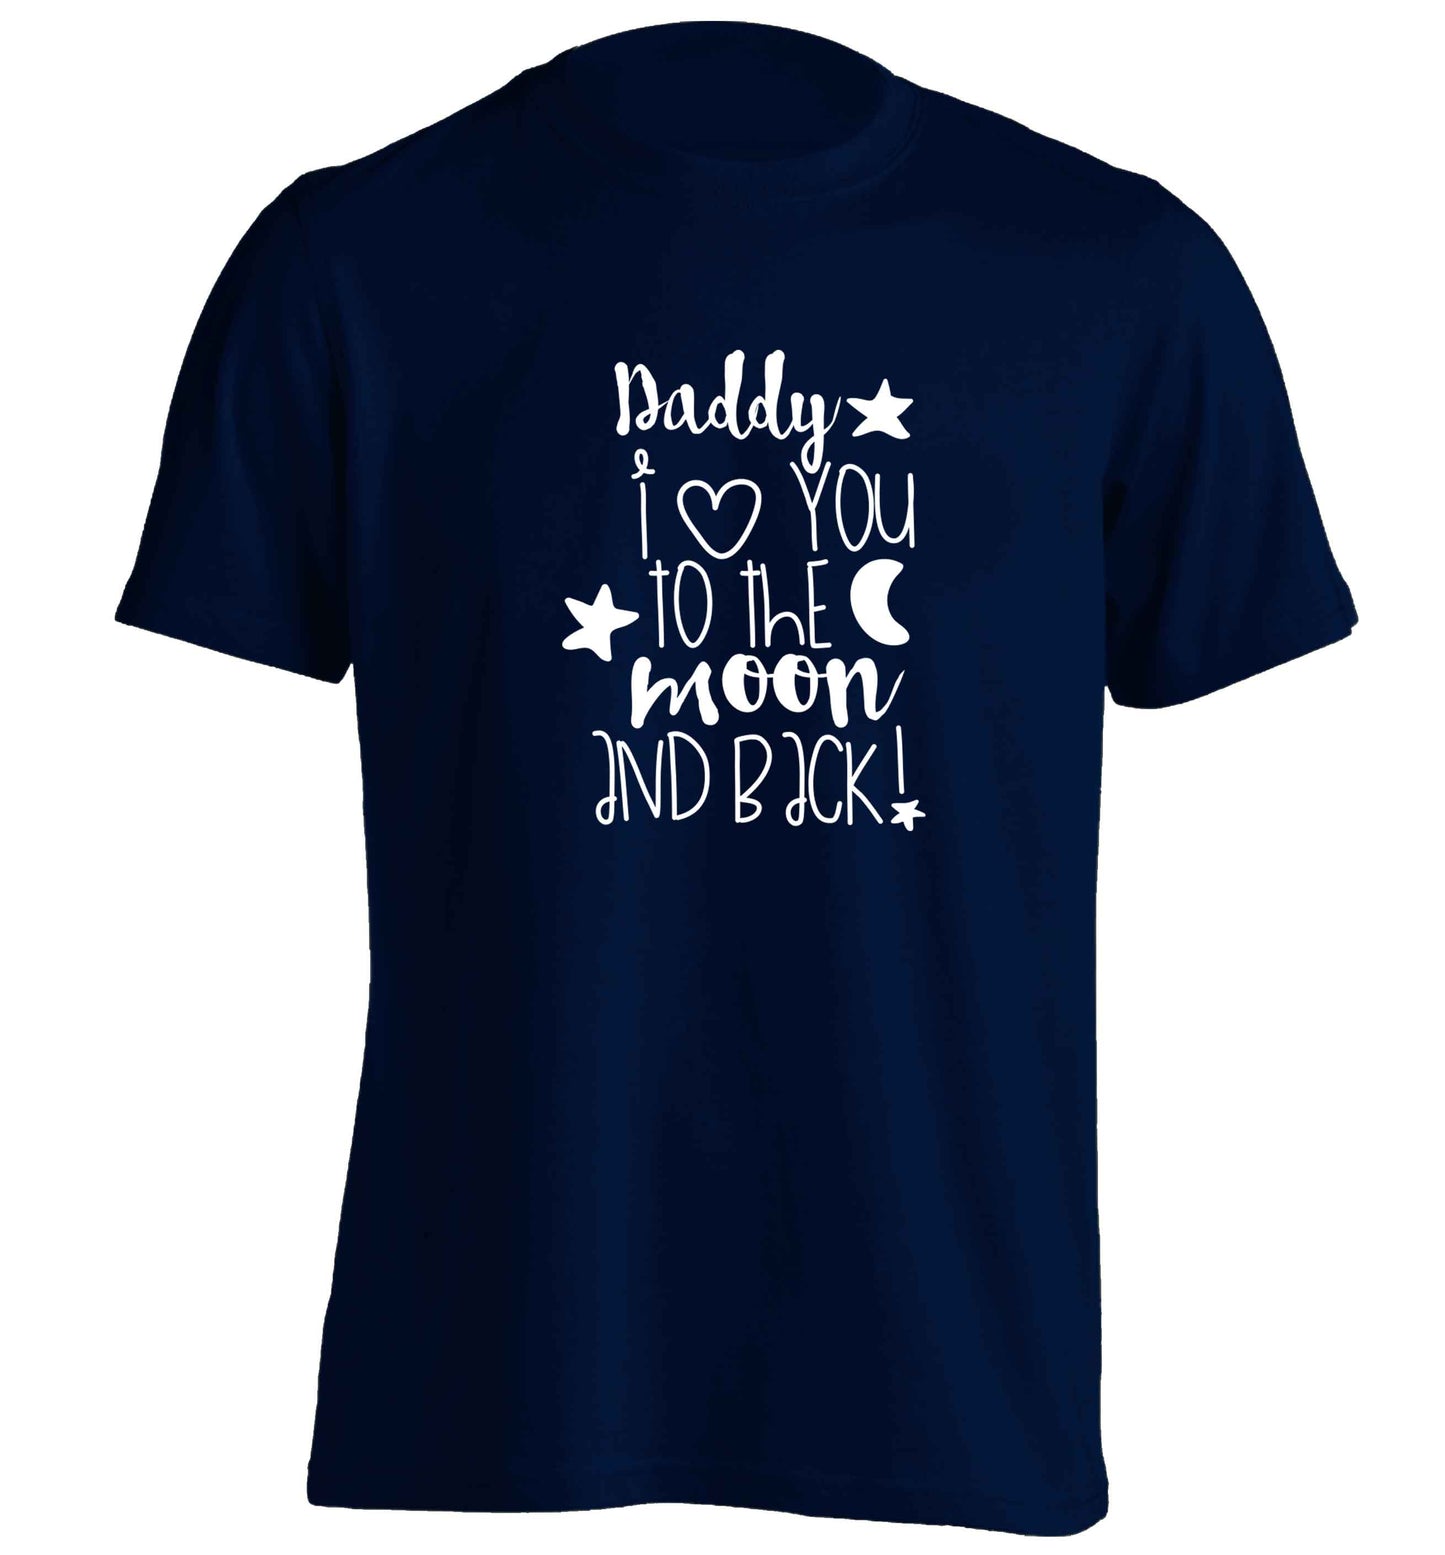 Daddy I love you to the moon and back adults unisex navy Tshirt 2XL